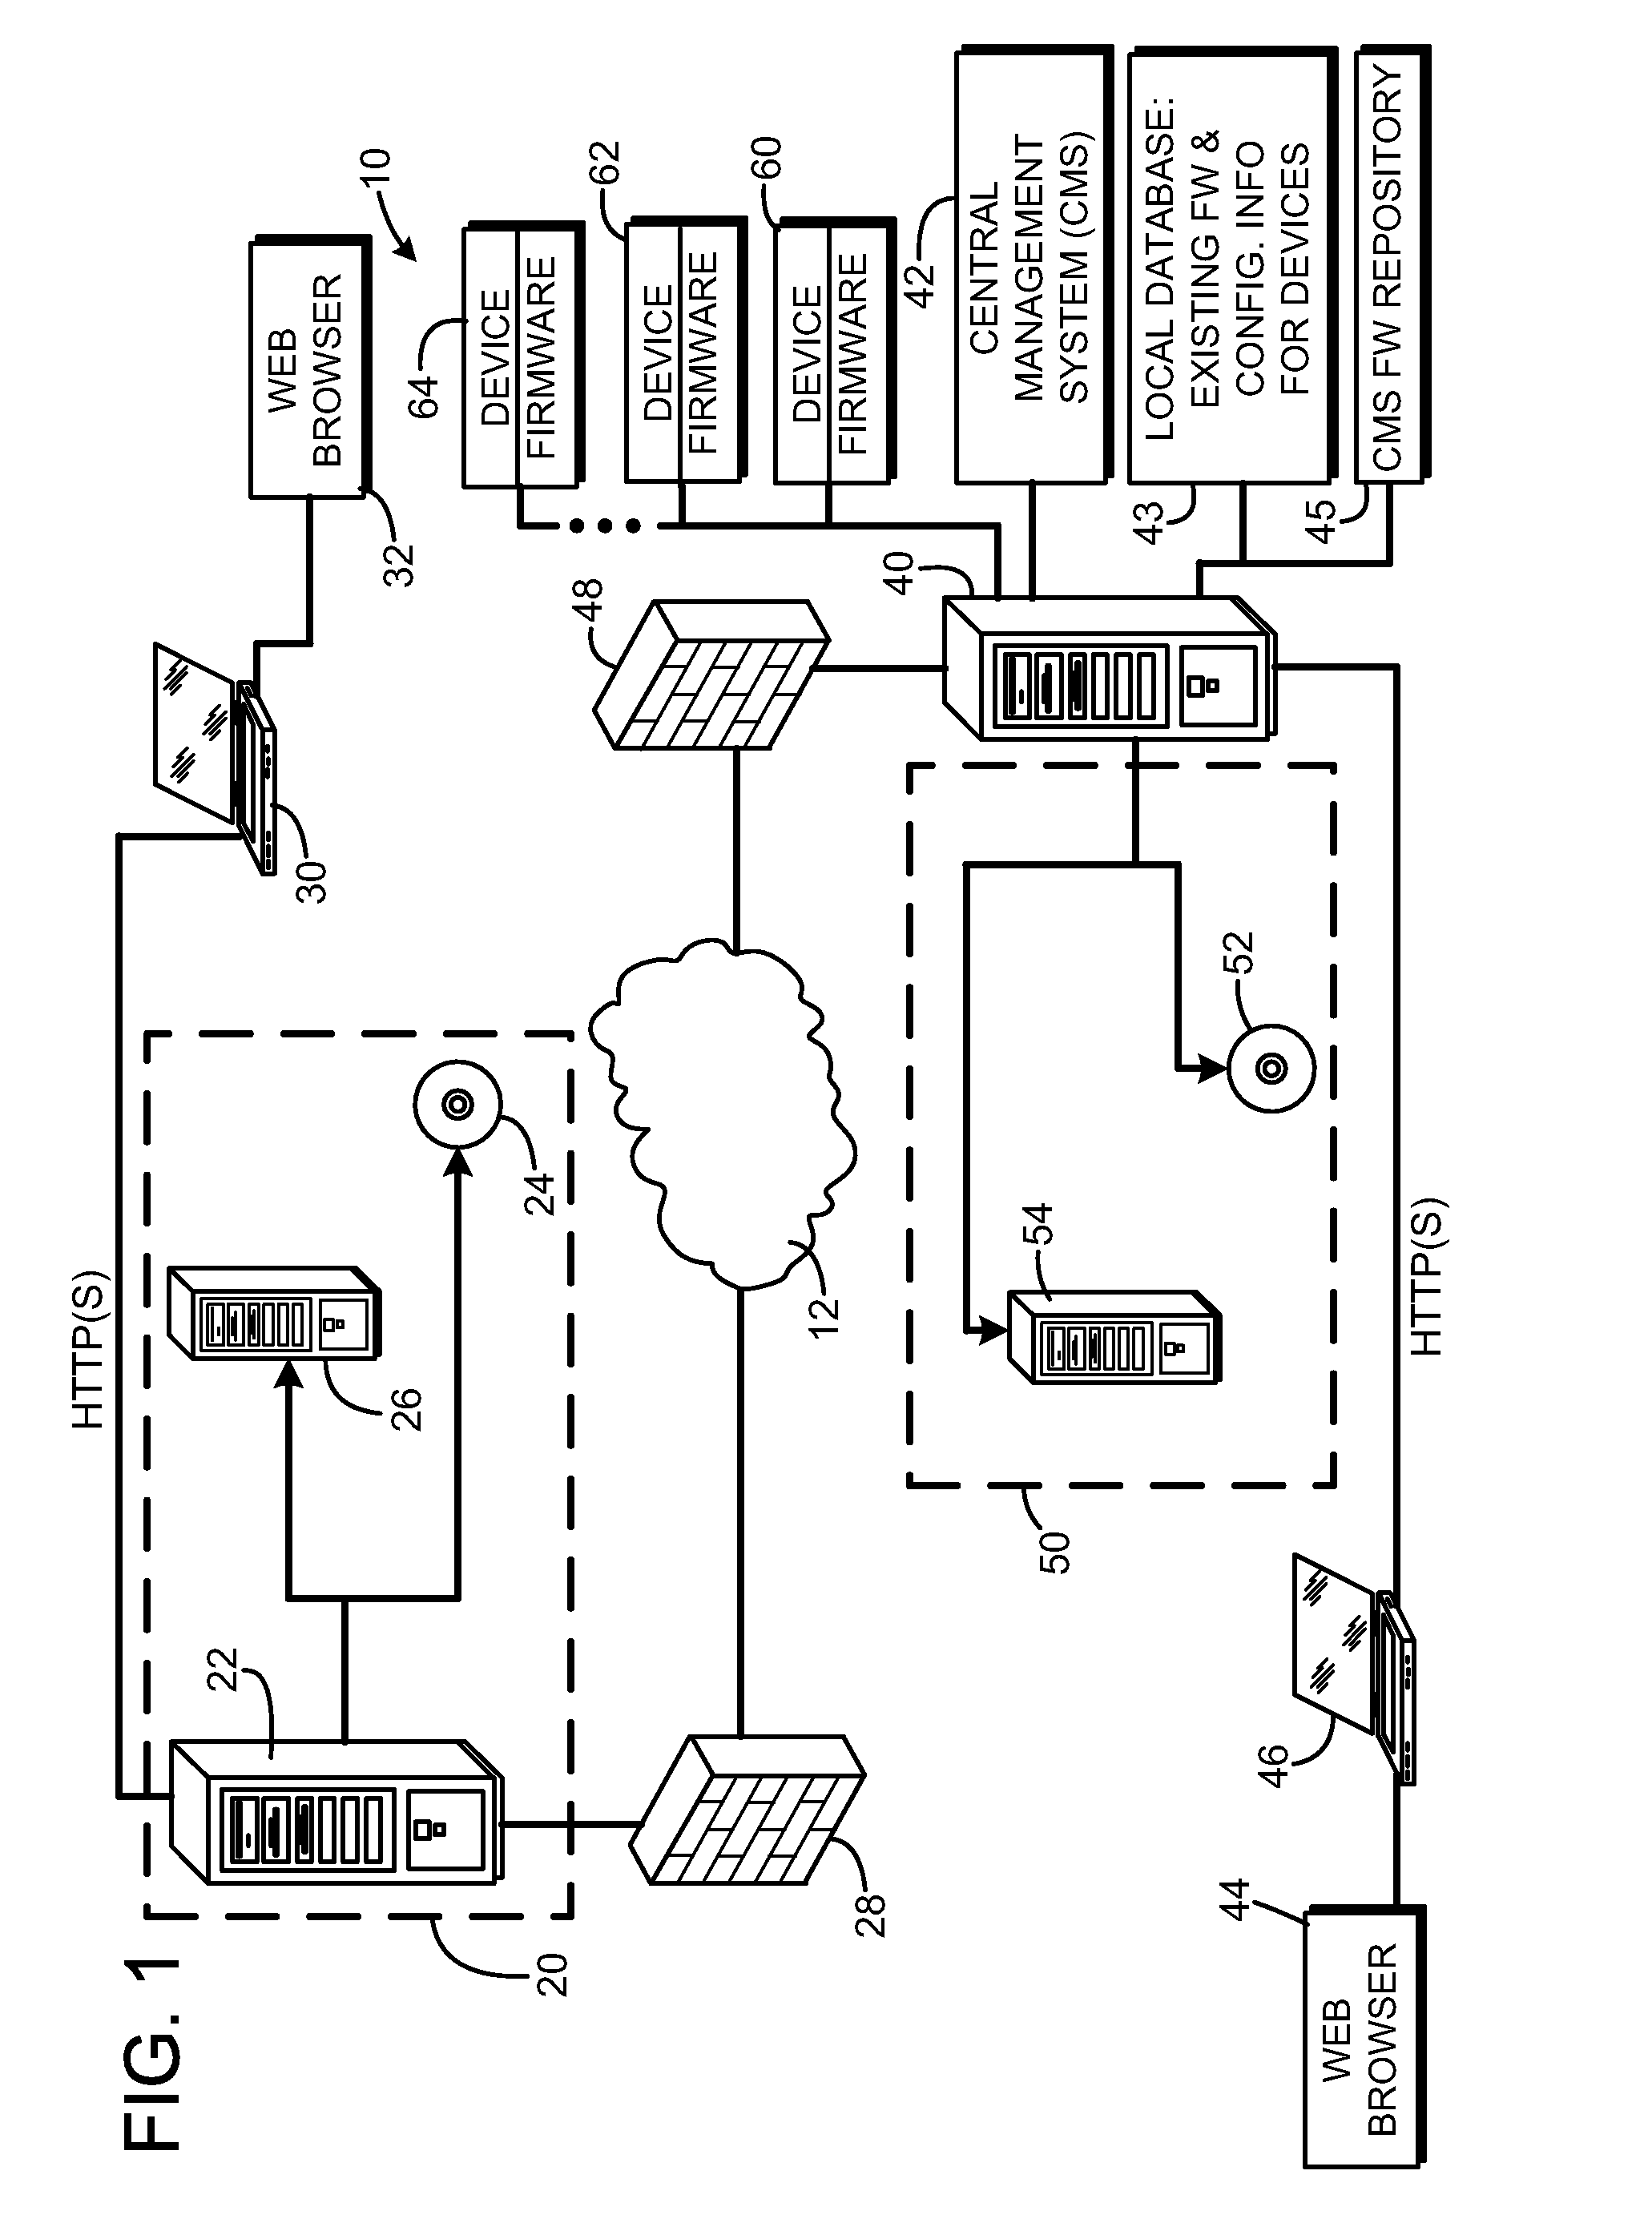 Firmware rollback and configuration restoration for electronic devices